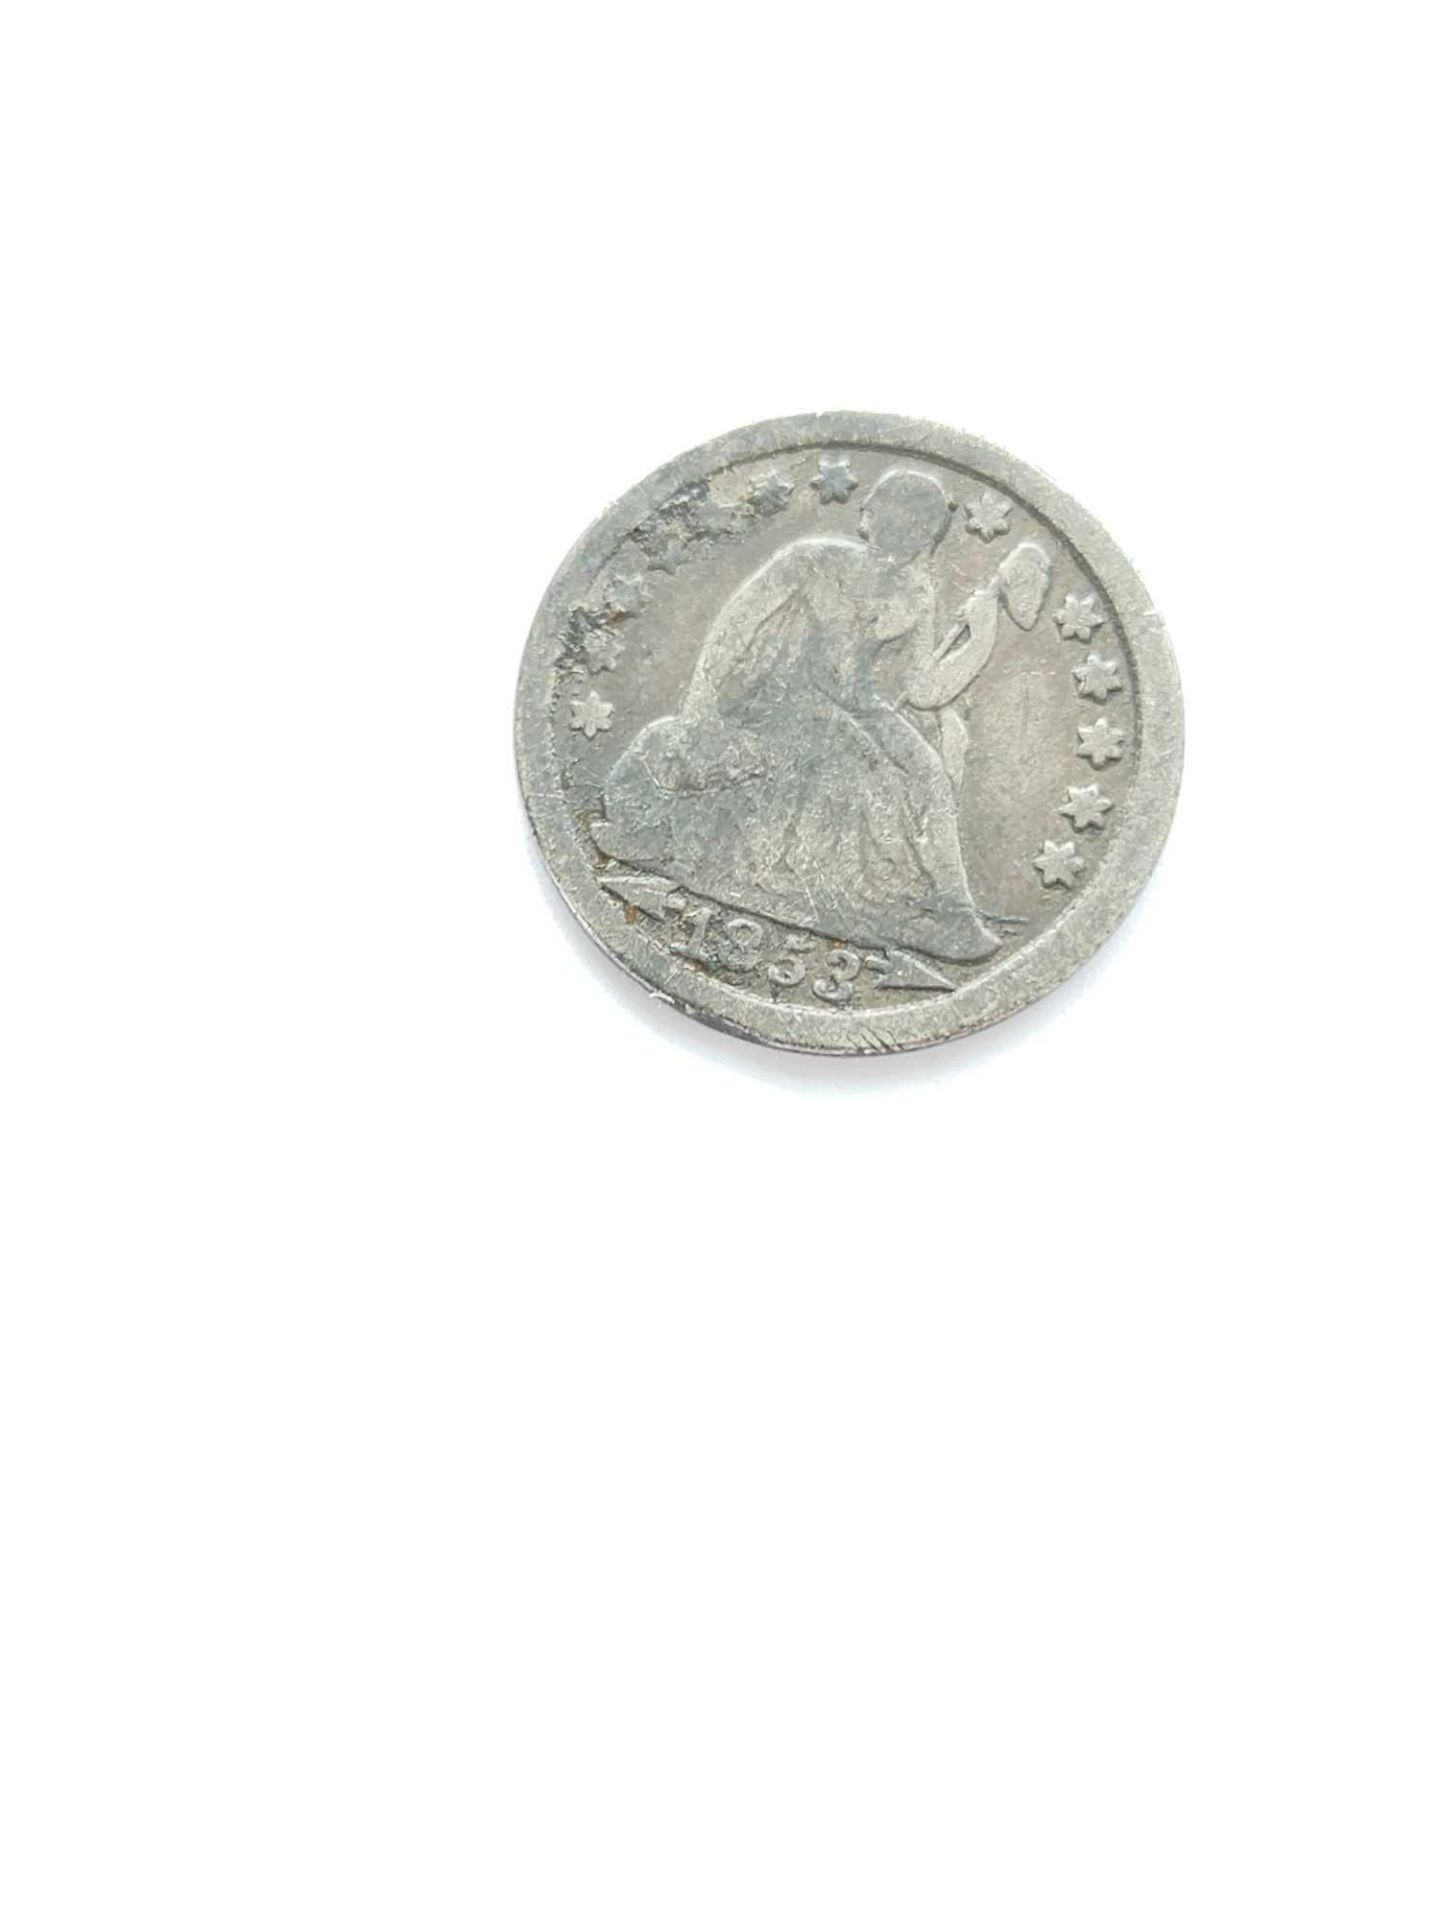 Rare US Coins and Silver Barber Quarter - Image 7 of 8